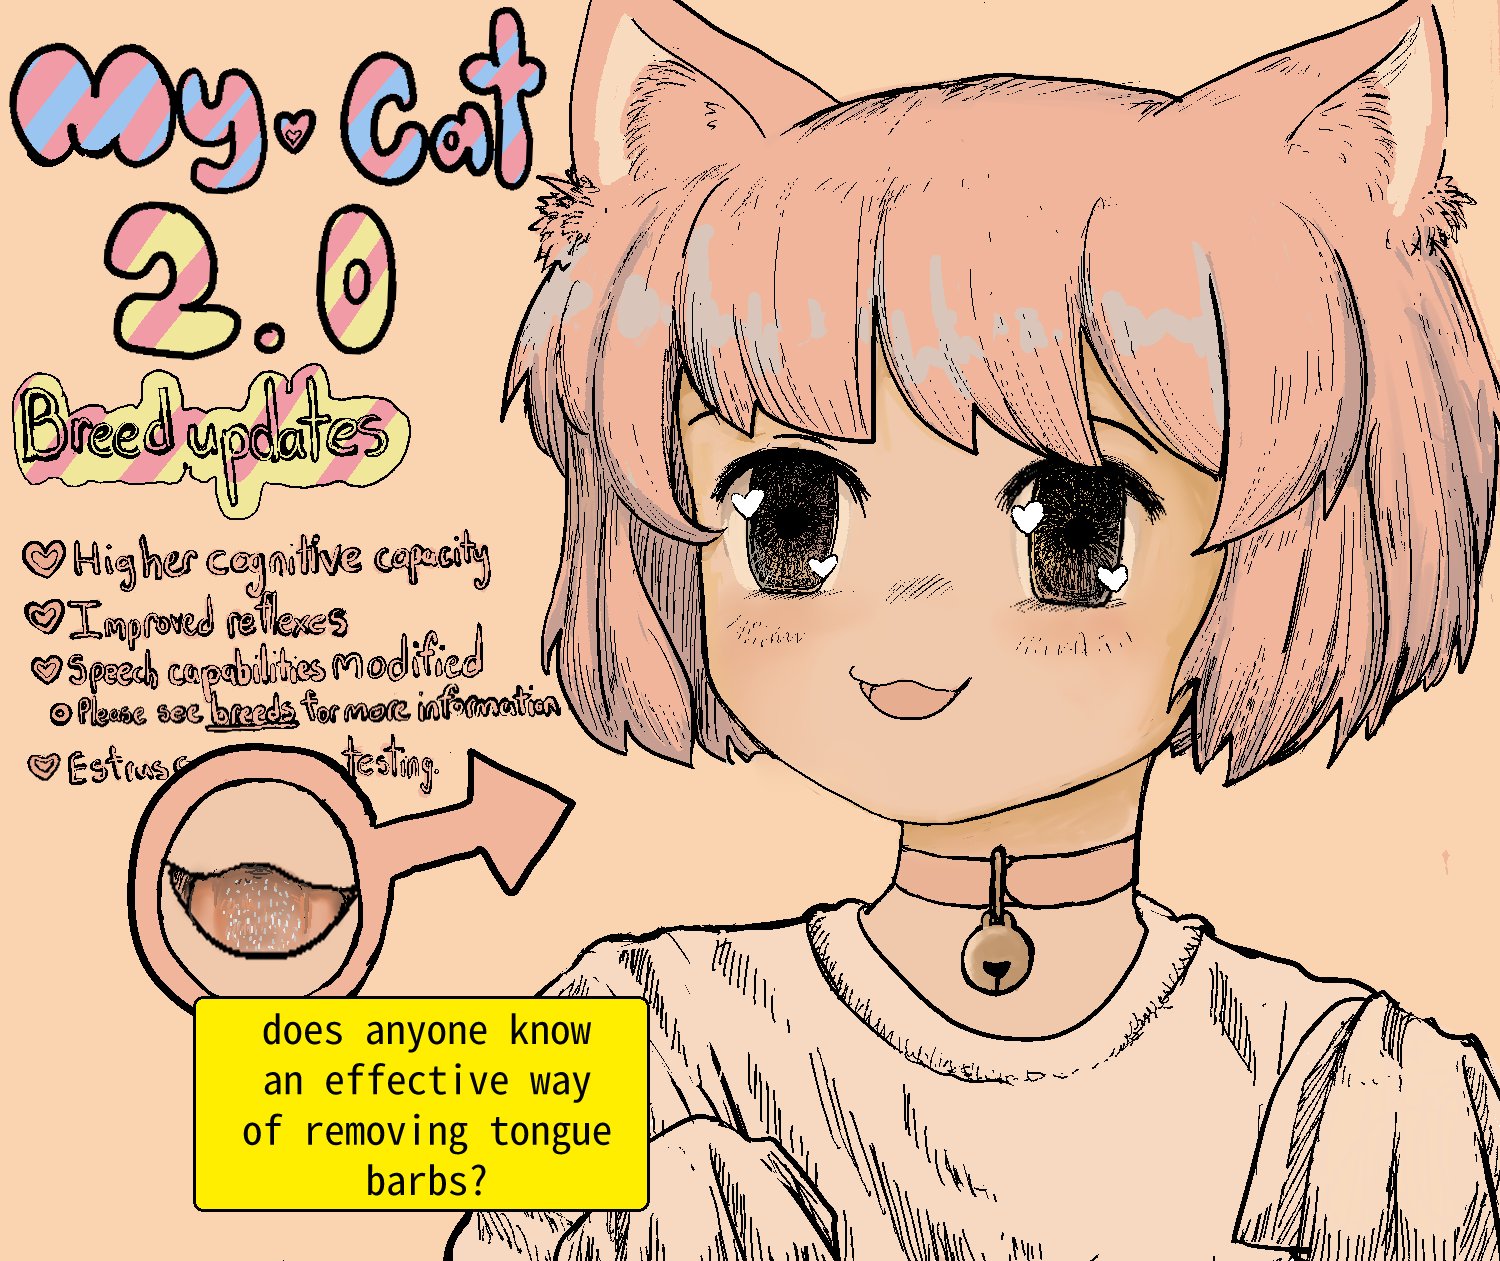 toasty 🍞 on X: genetically engineered catgirls for domestic ownership  (1/3).  / X